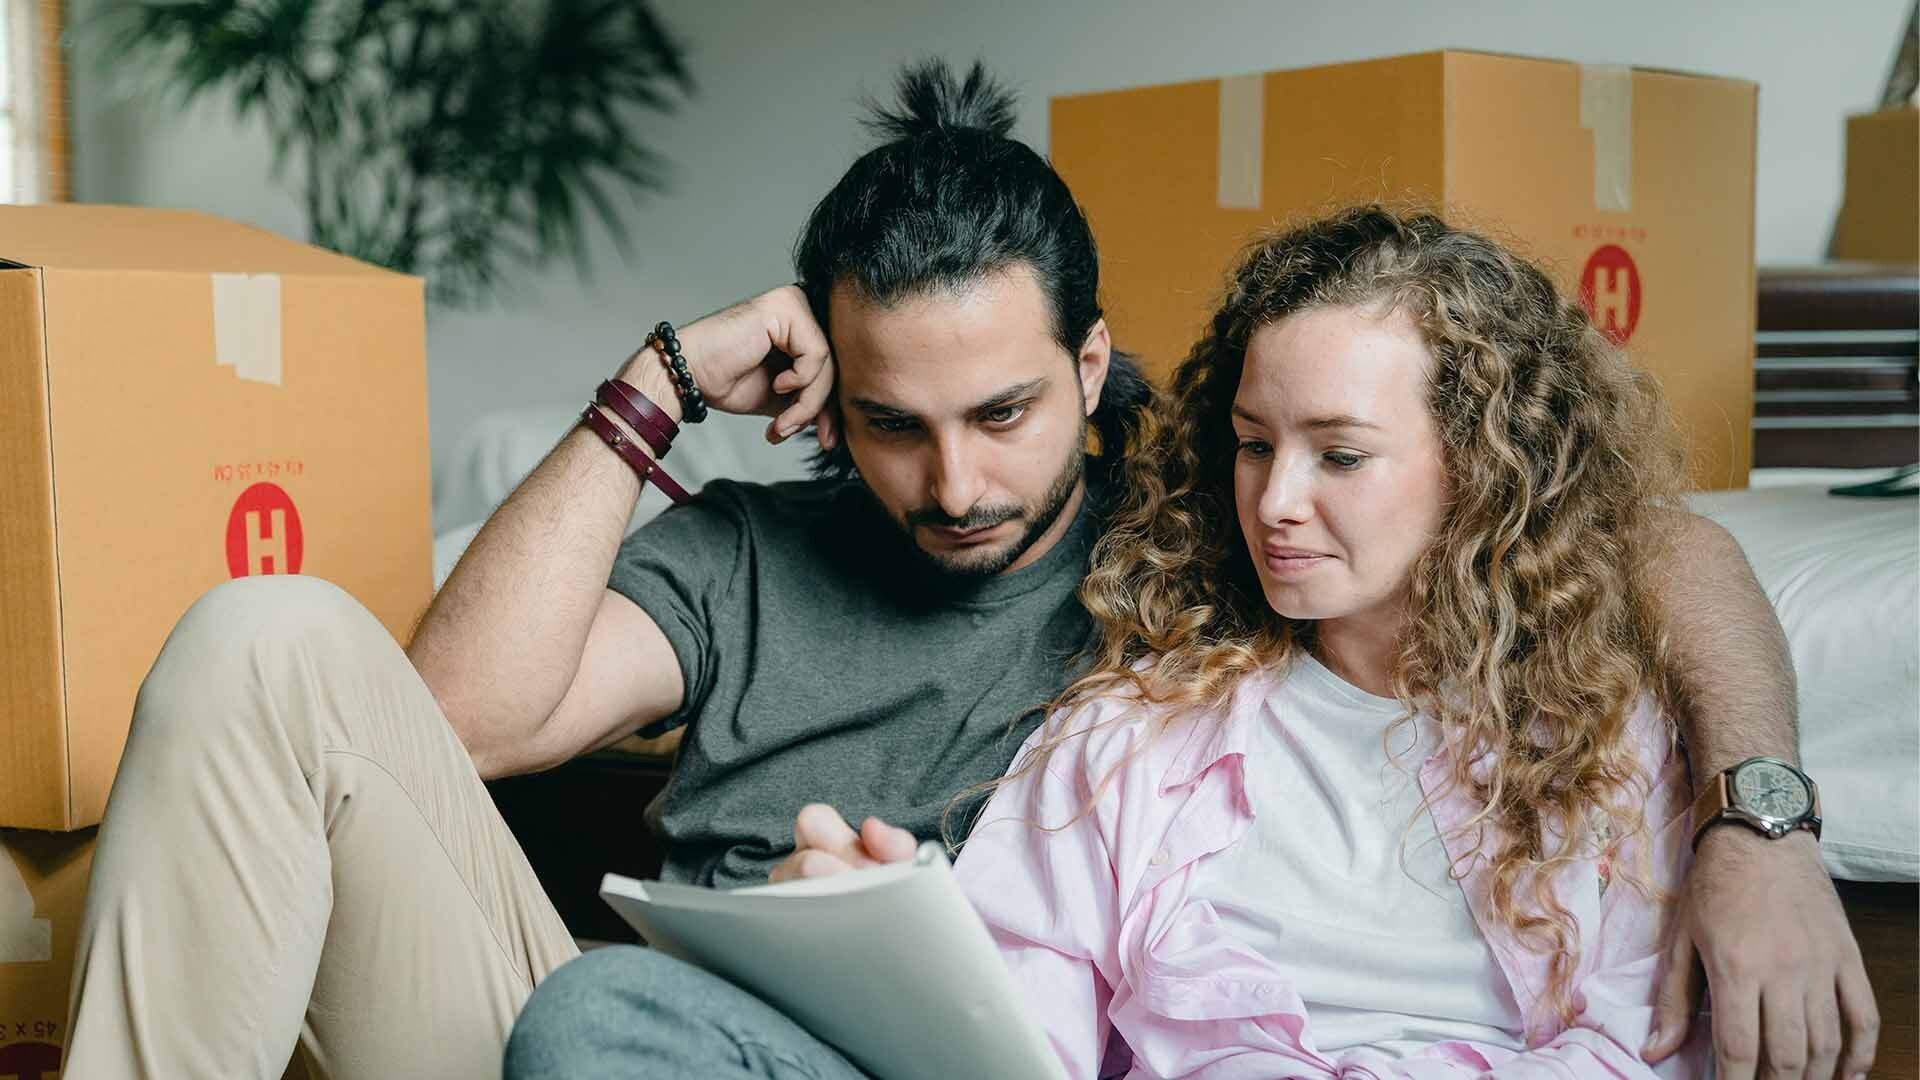 Couple sitting on couch surrounded by boxes and looking at note pad